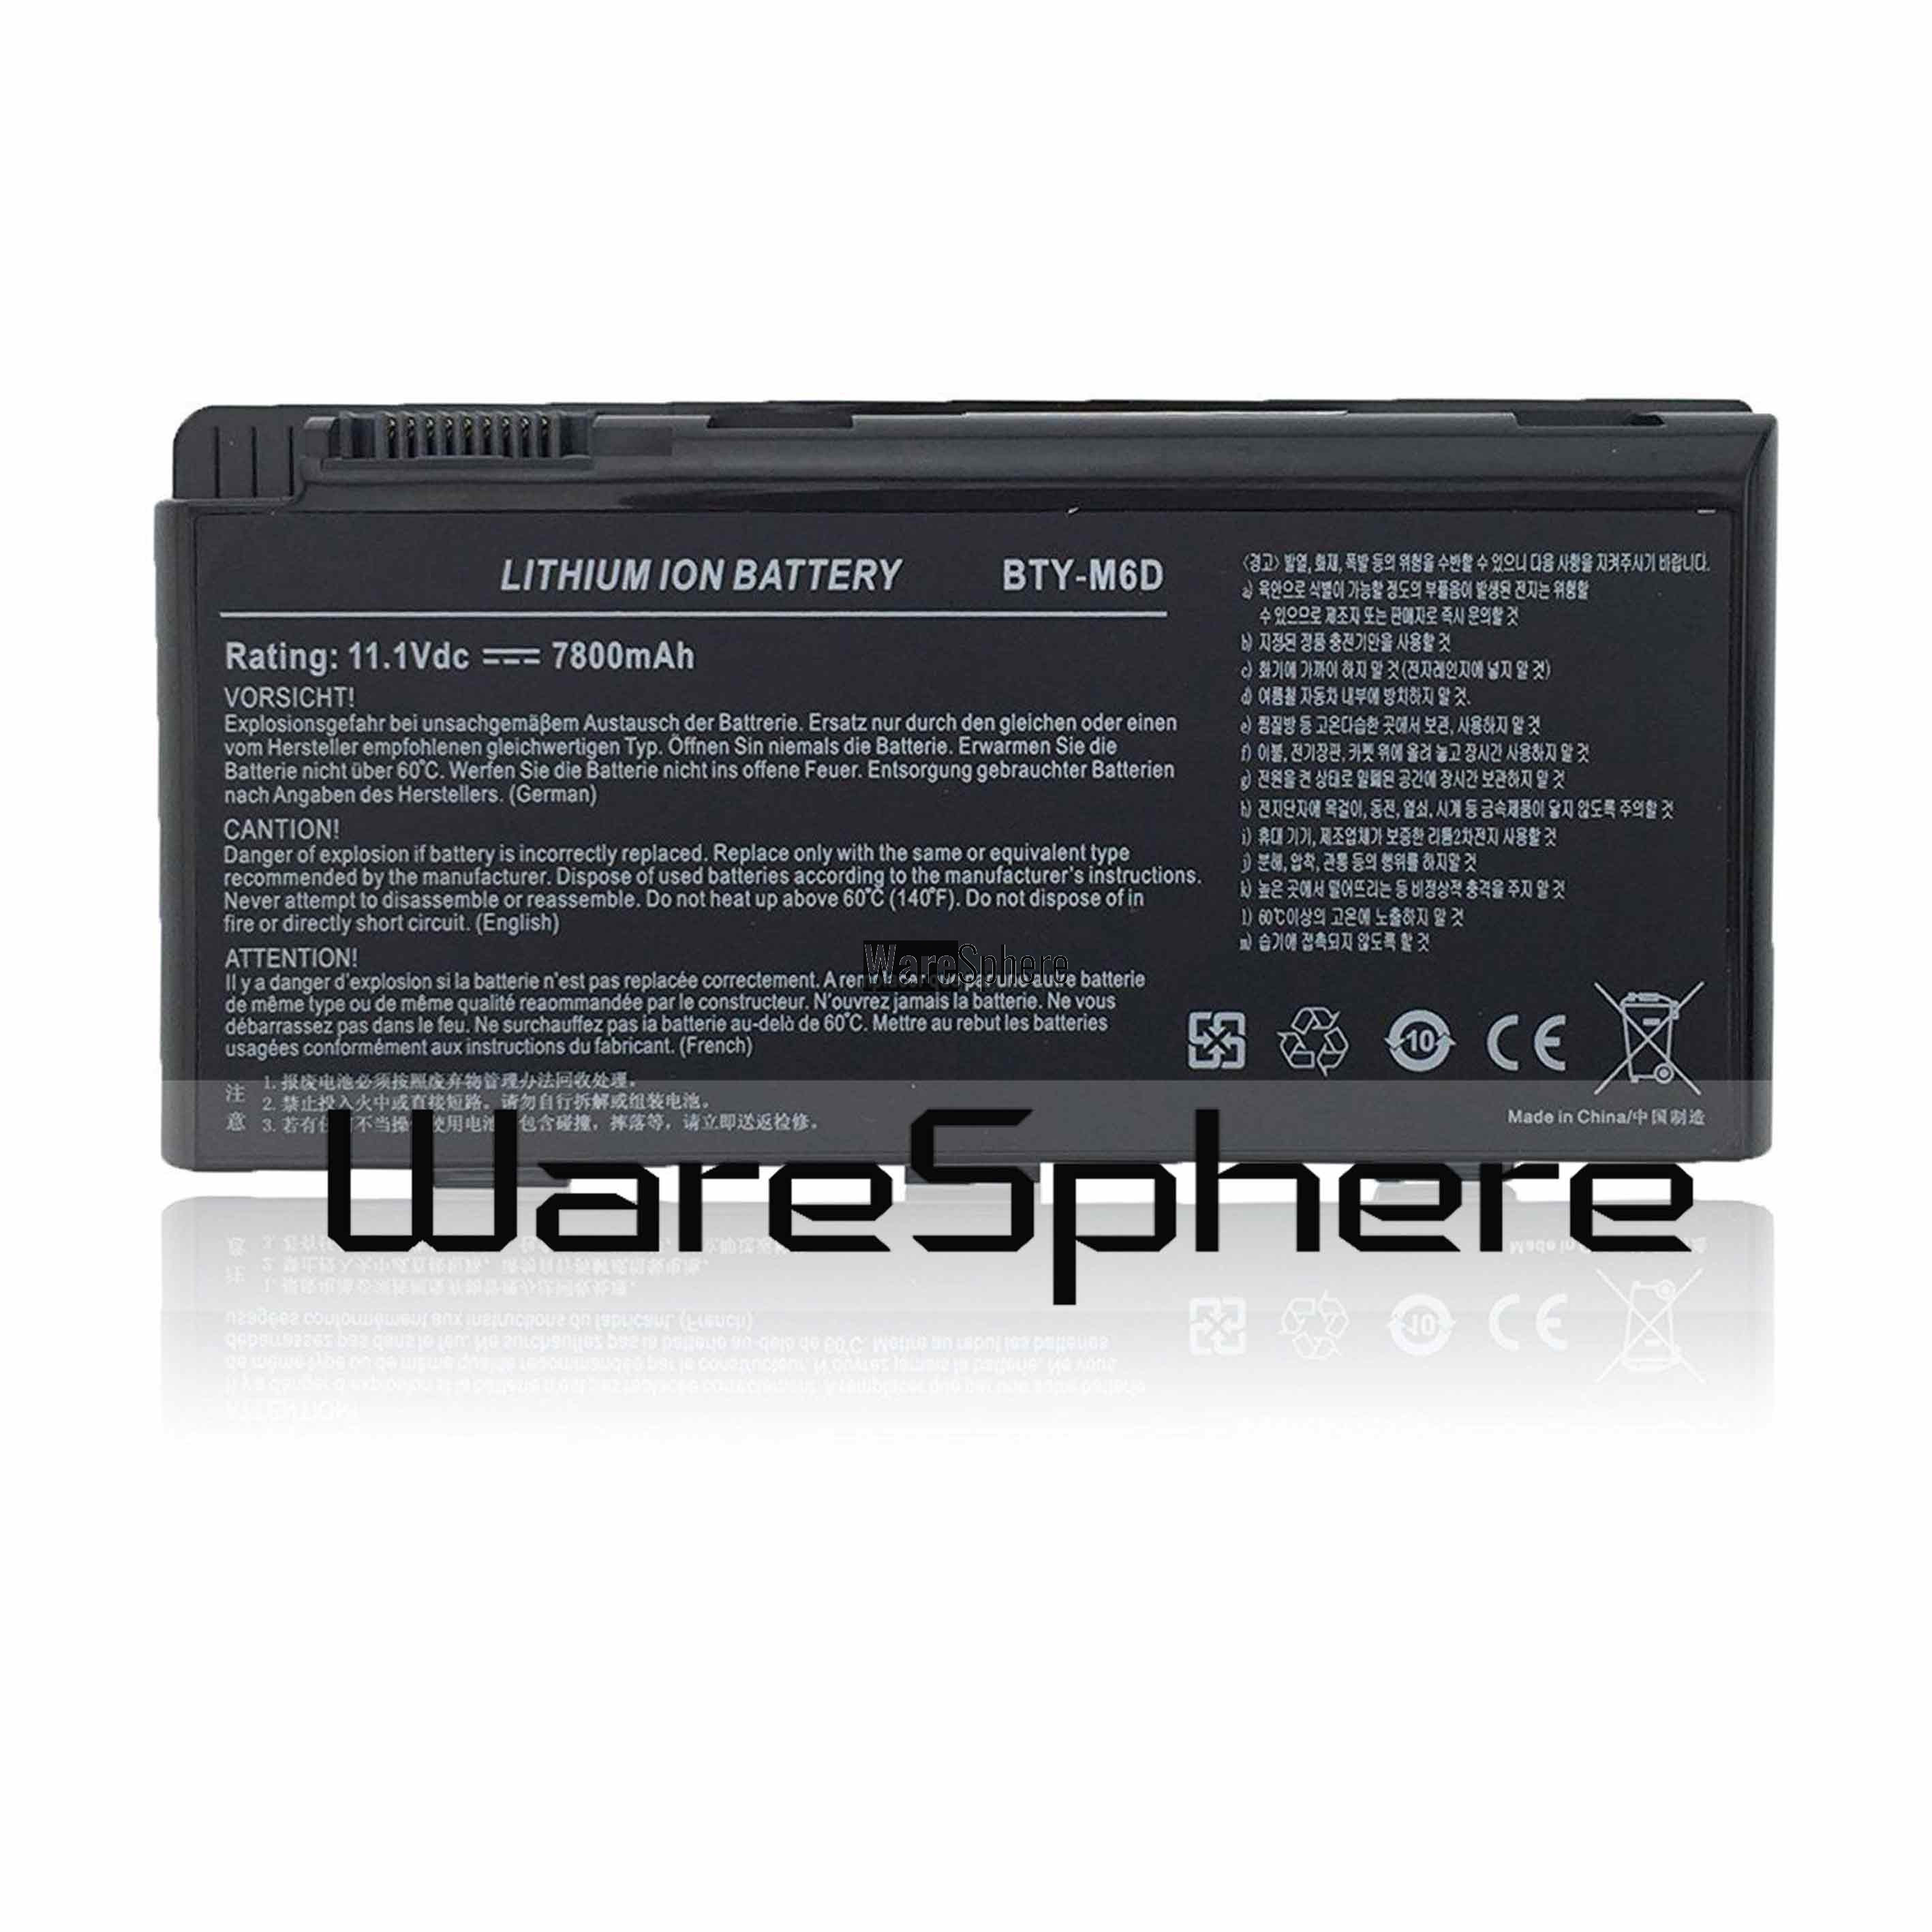 Li-Ion Battery for MSI 7800mAh BTY-M6D Rechargeable  (BTY-M6D)